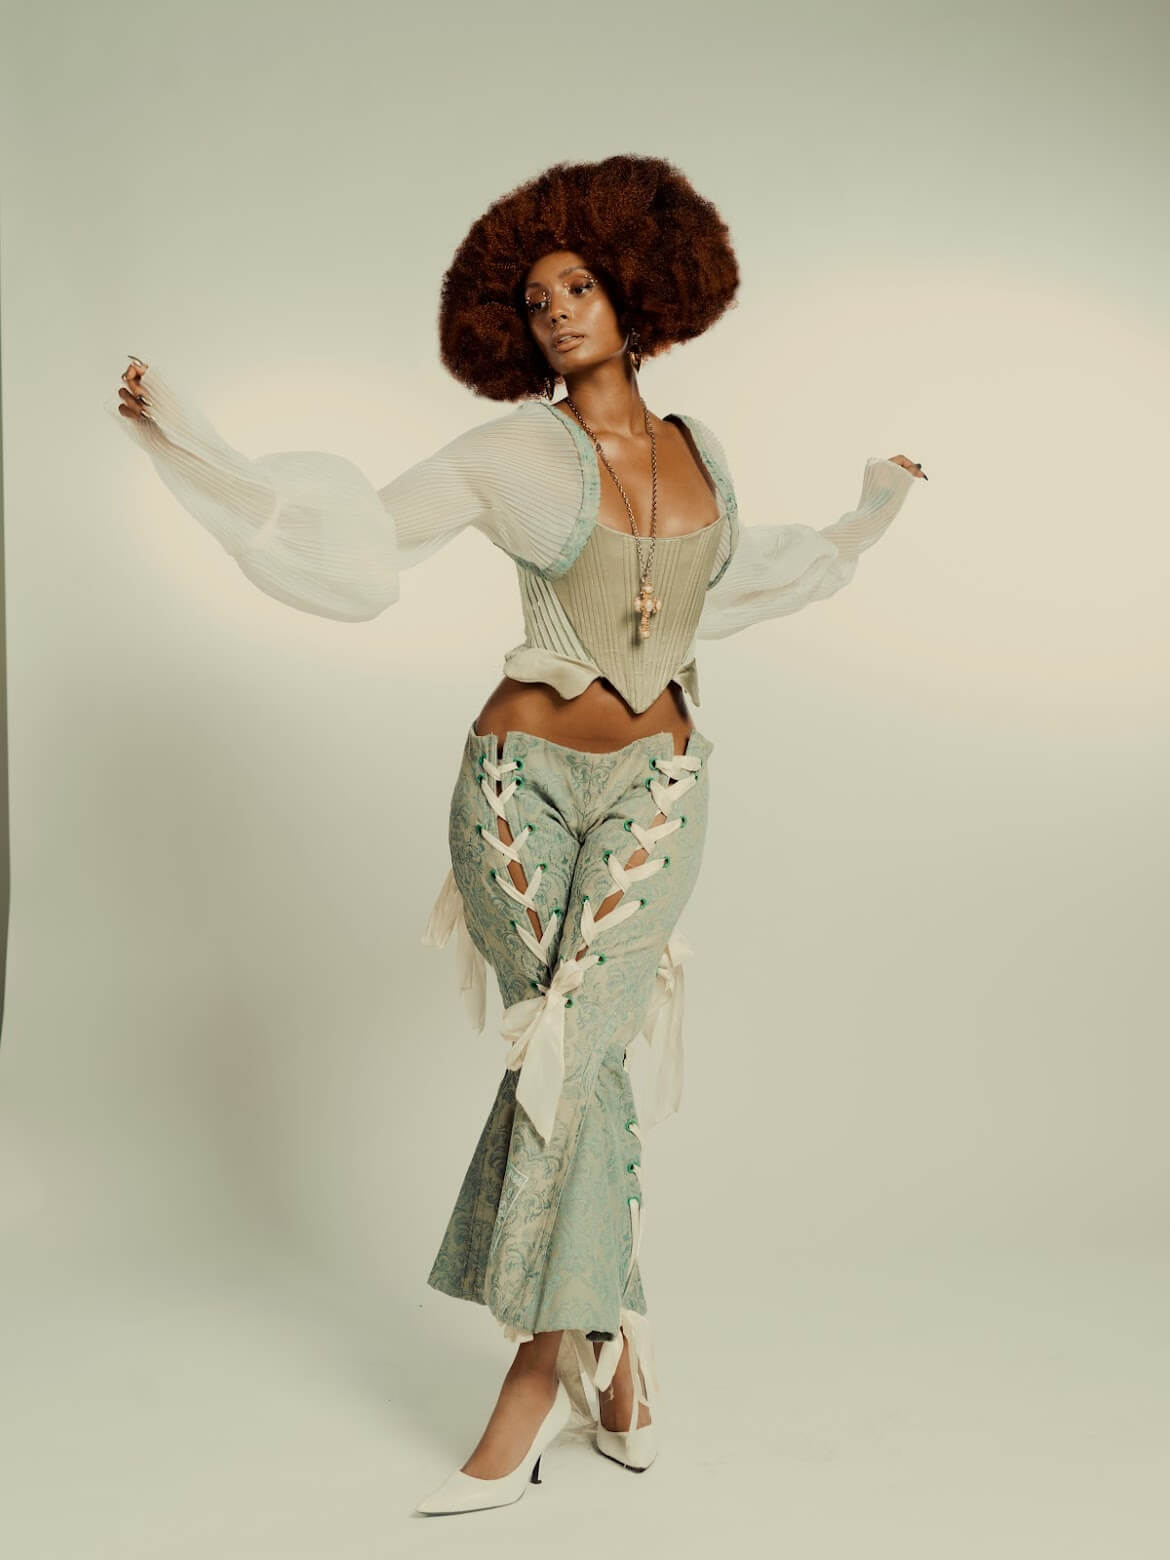 Beautiful black woman with an afro in bell bottoms and white heels